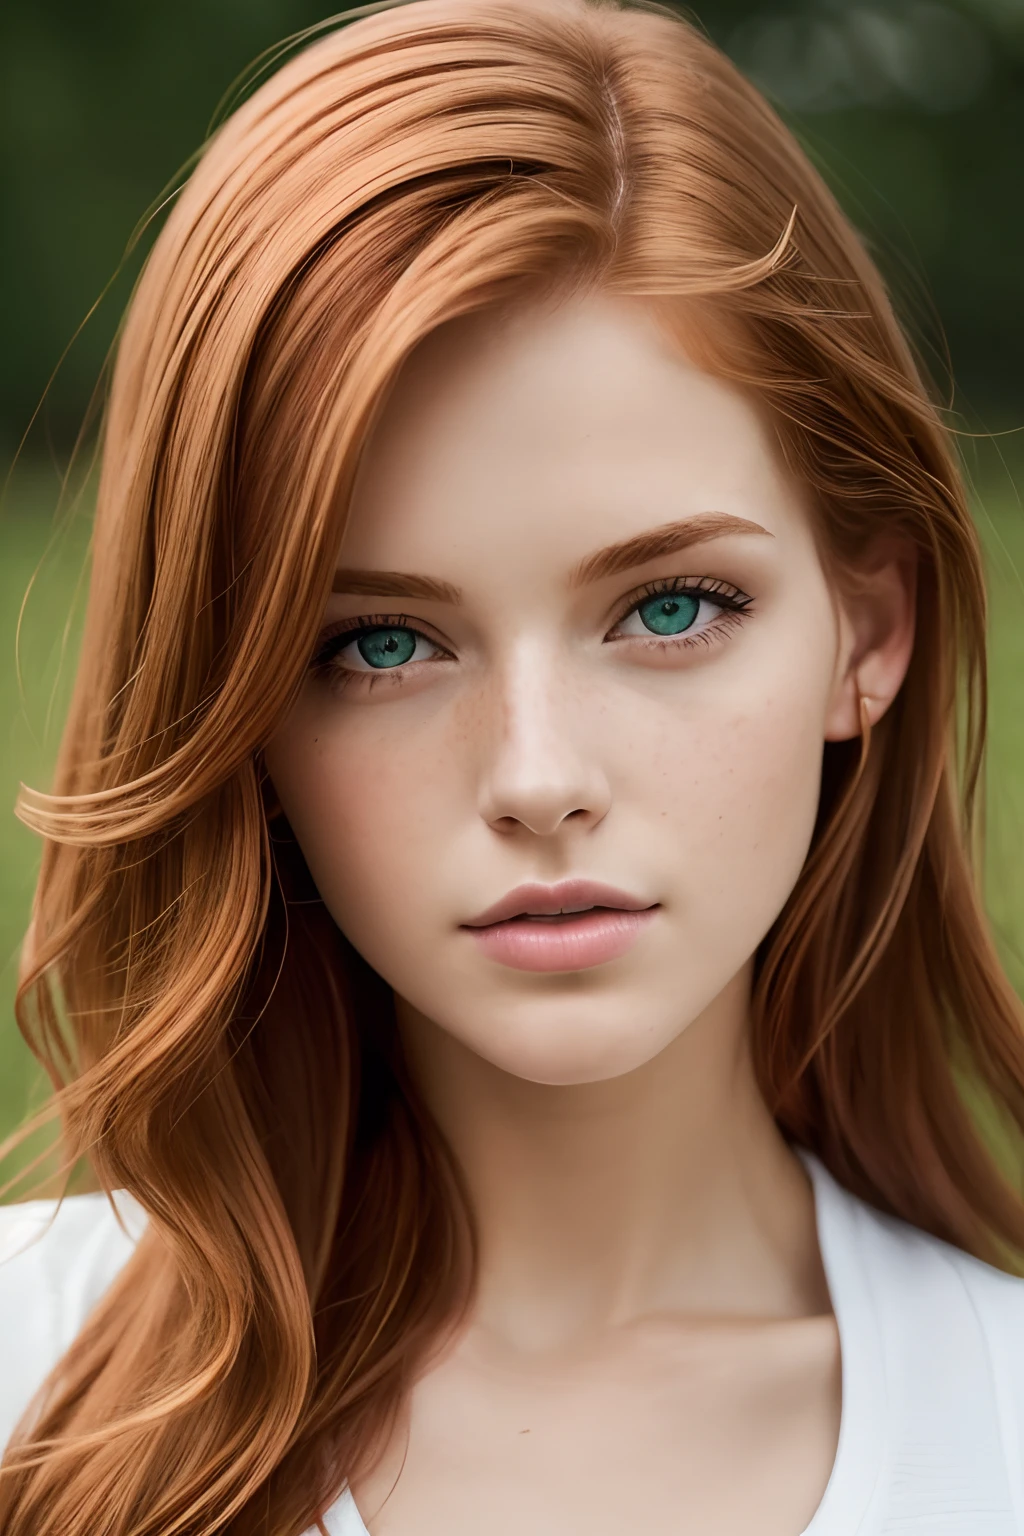 (close-up editorial photo oF 20 yo woman, 姜黄色头发, 苗条的美国甜心), (Freckles:0.8), (双唇微张), 实际的 green eyes, 扔, 实际的[:, (Film grain, 25 毫米, F/1.2, doF, 散景, beautiFul symmetrical Face, perFect sparkling eyes, well deFined pupils, 高对比度的眼睛, 超细致的皮肤, 皮肤毛孔, 毛茸茸的头发, Fabric stitching, Fabric texture, 木纹, 石材纹理, Finely detailed Features:1):0.9]